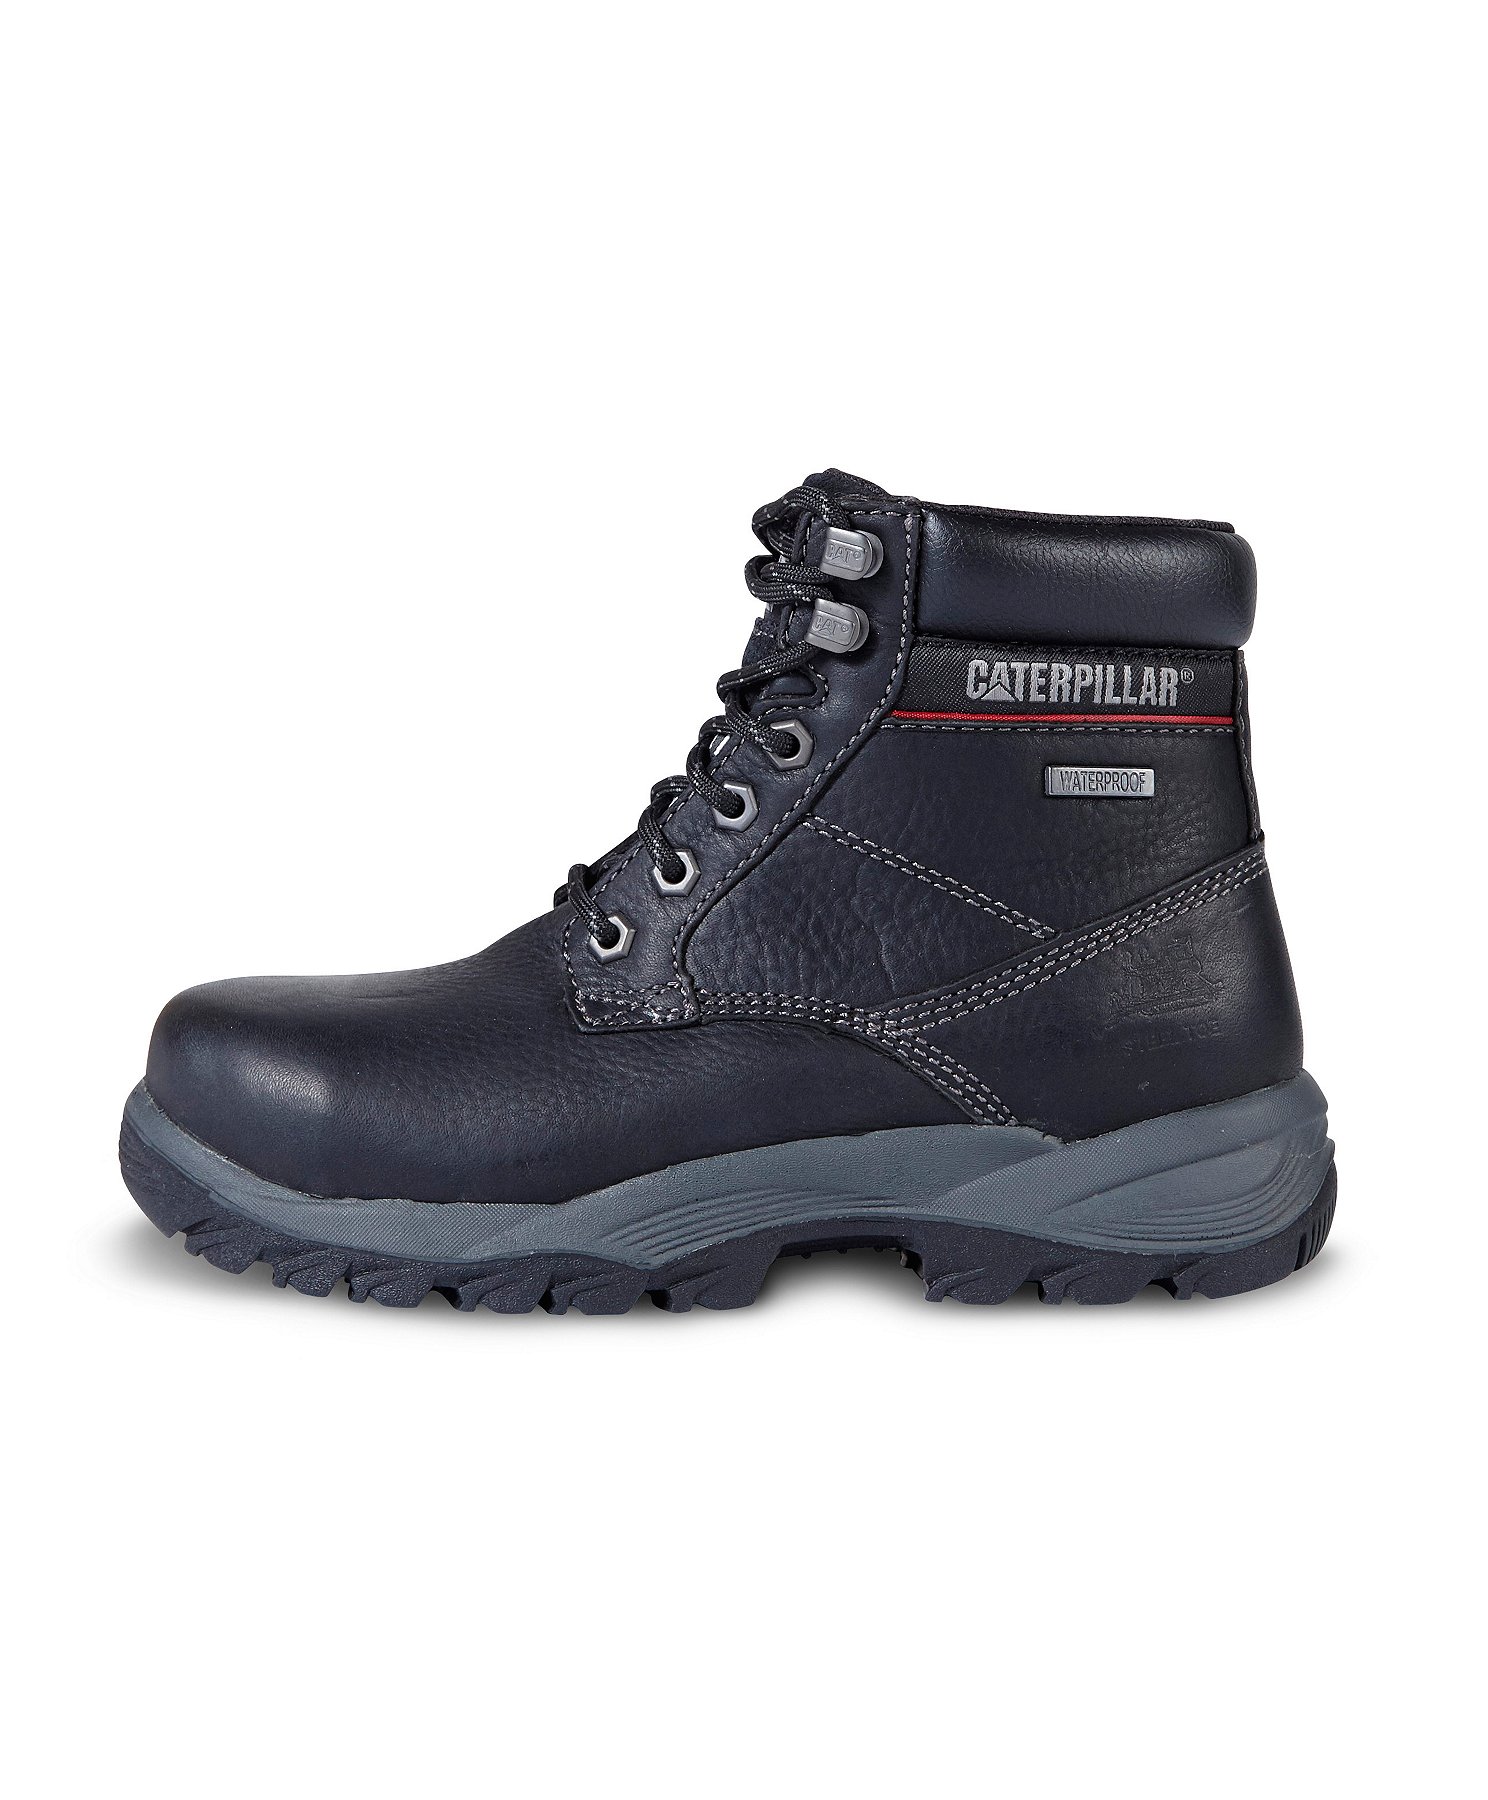 Cat Dryverse Womens Safety Boots